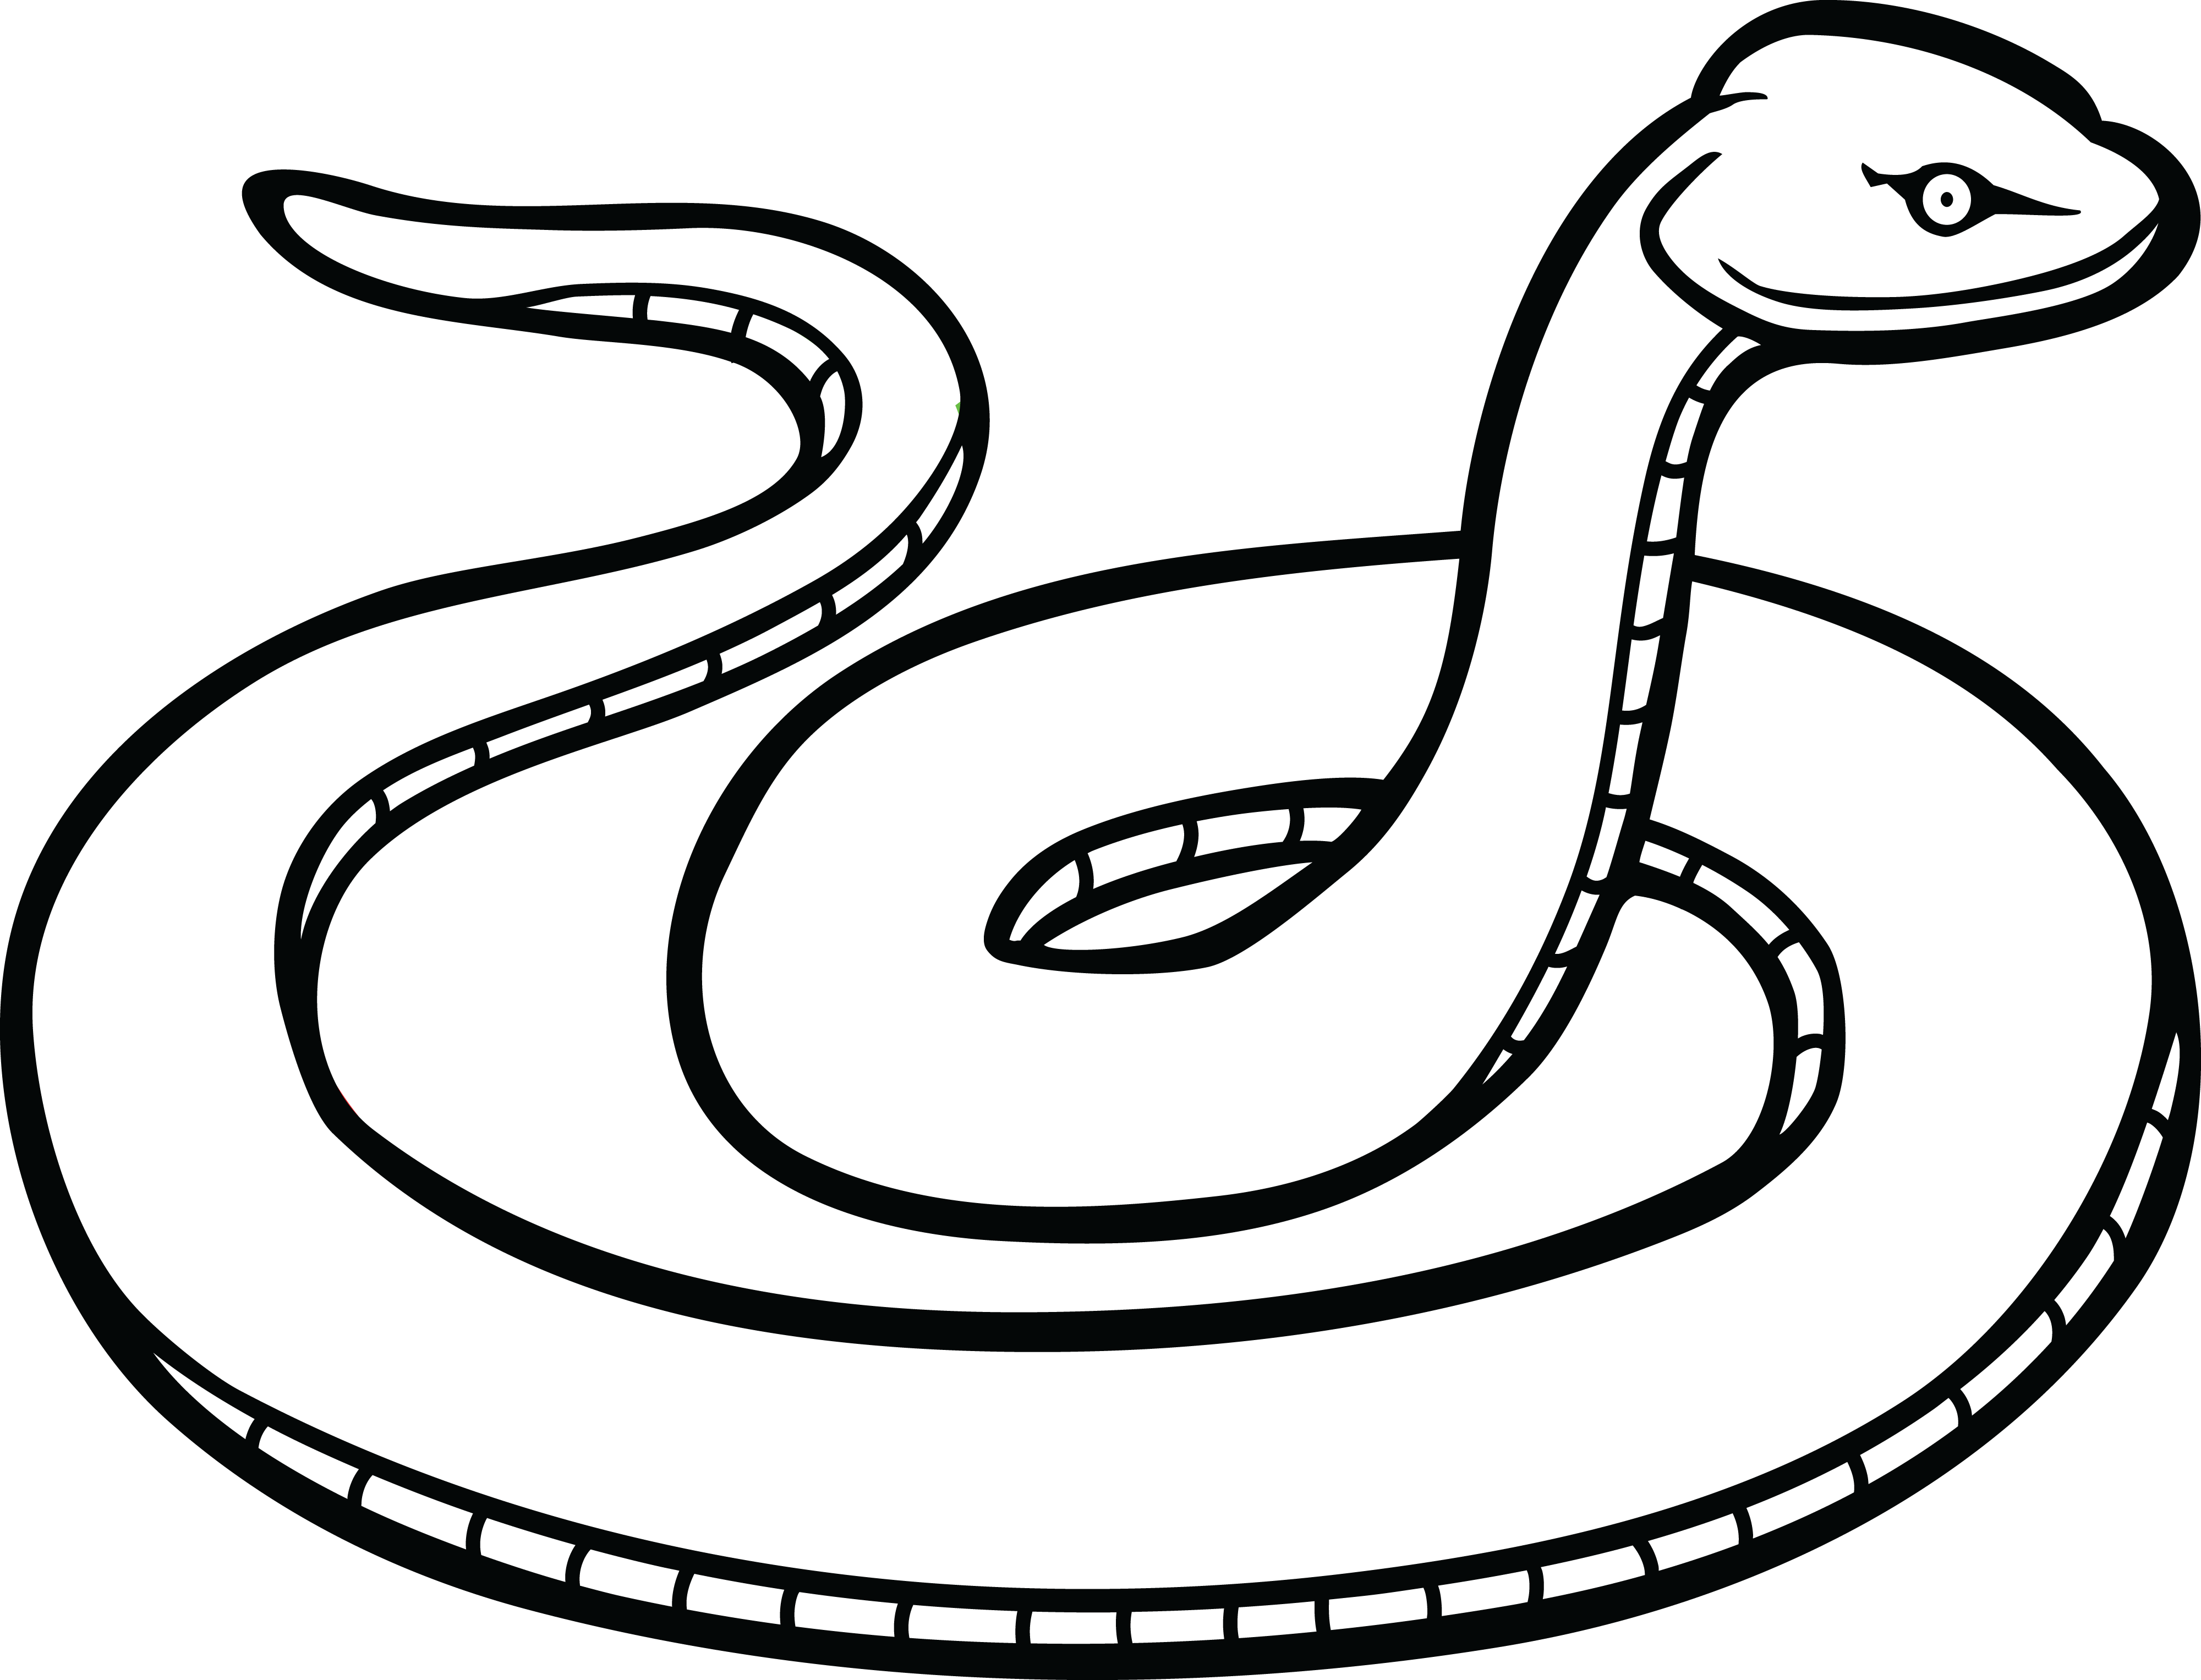 Free Clipart Of A Snake - Clip Art Of Snake (4000x3054)